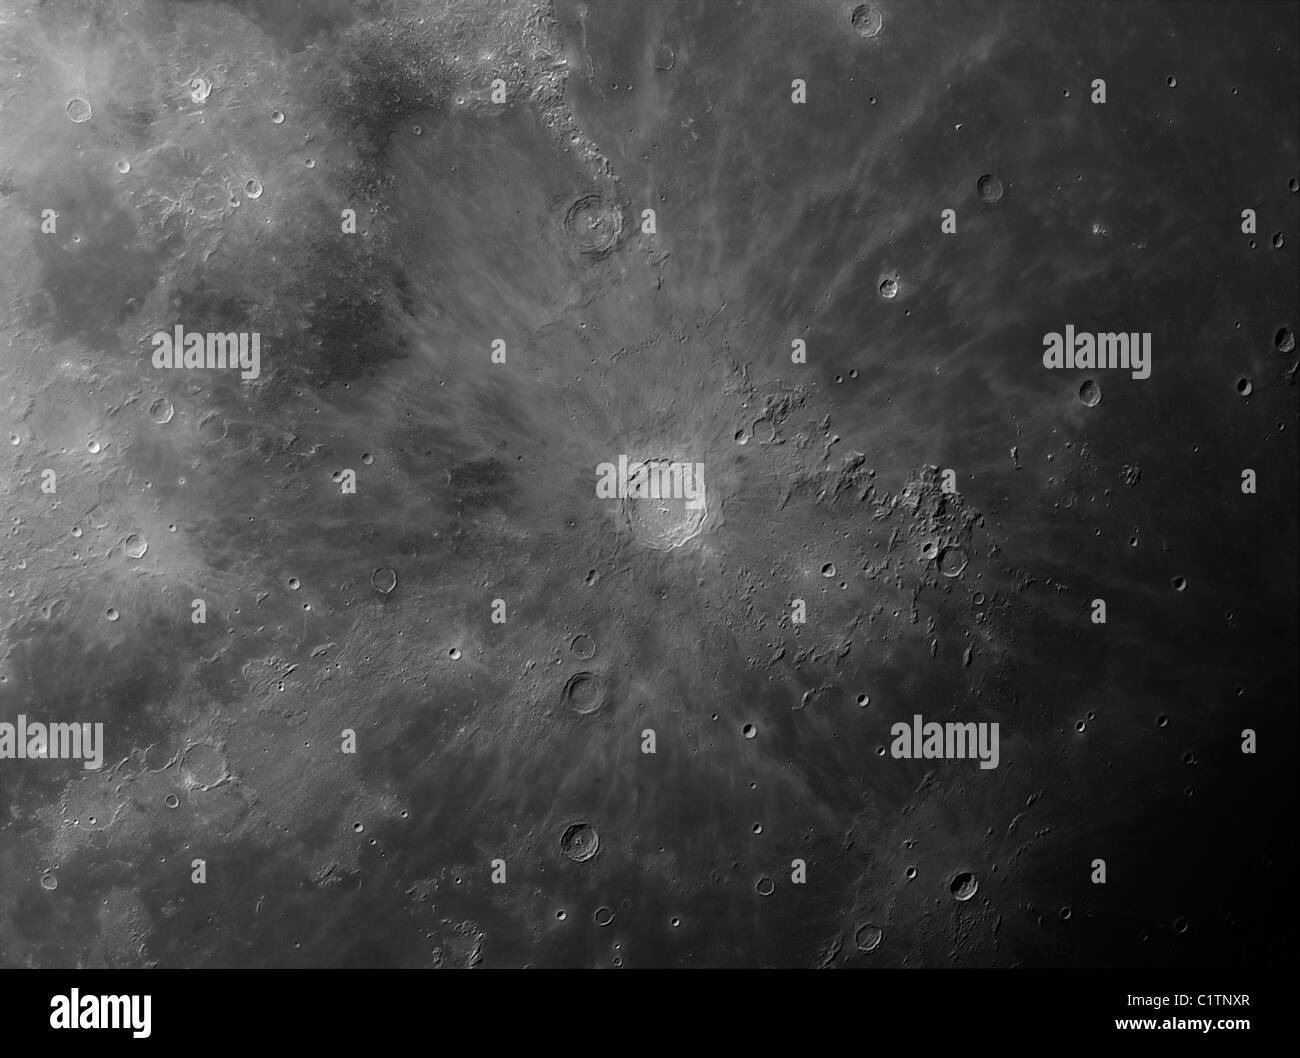 Close-up view of Copernicus, an impact crater on the moon. Stock Photo